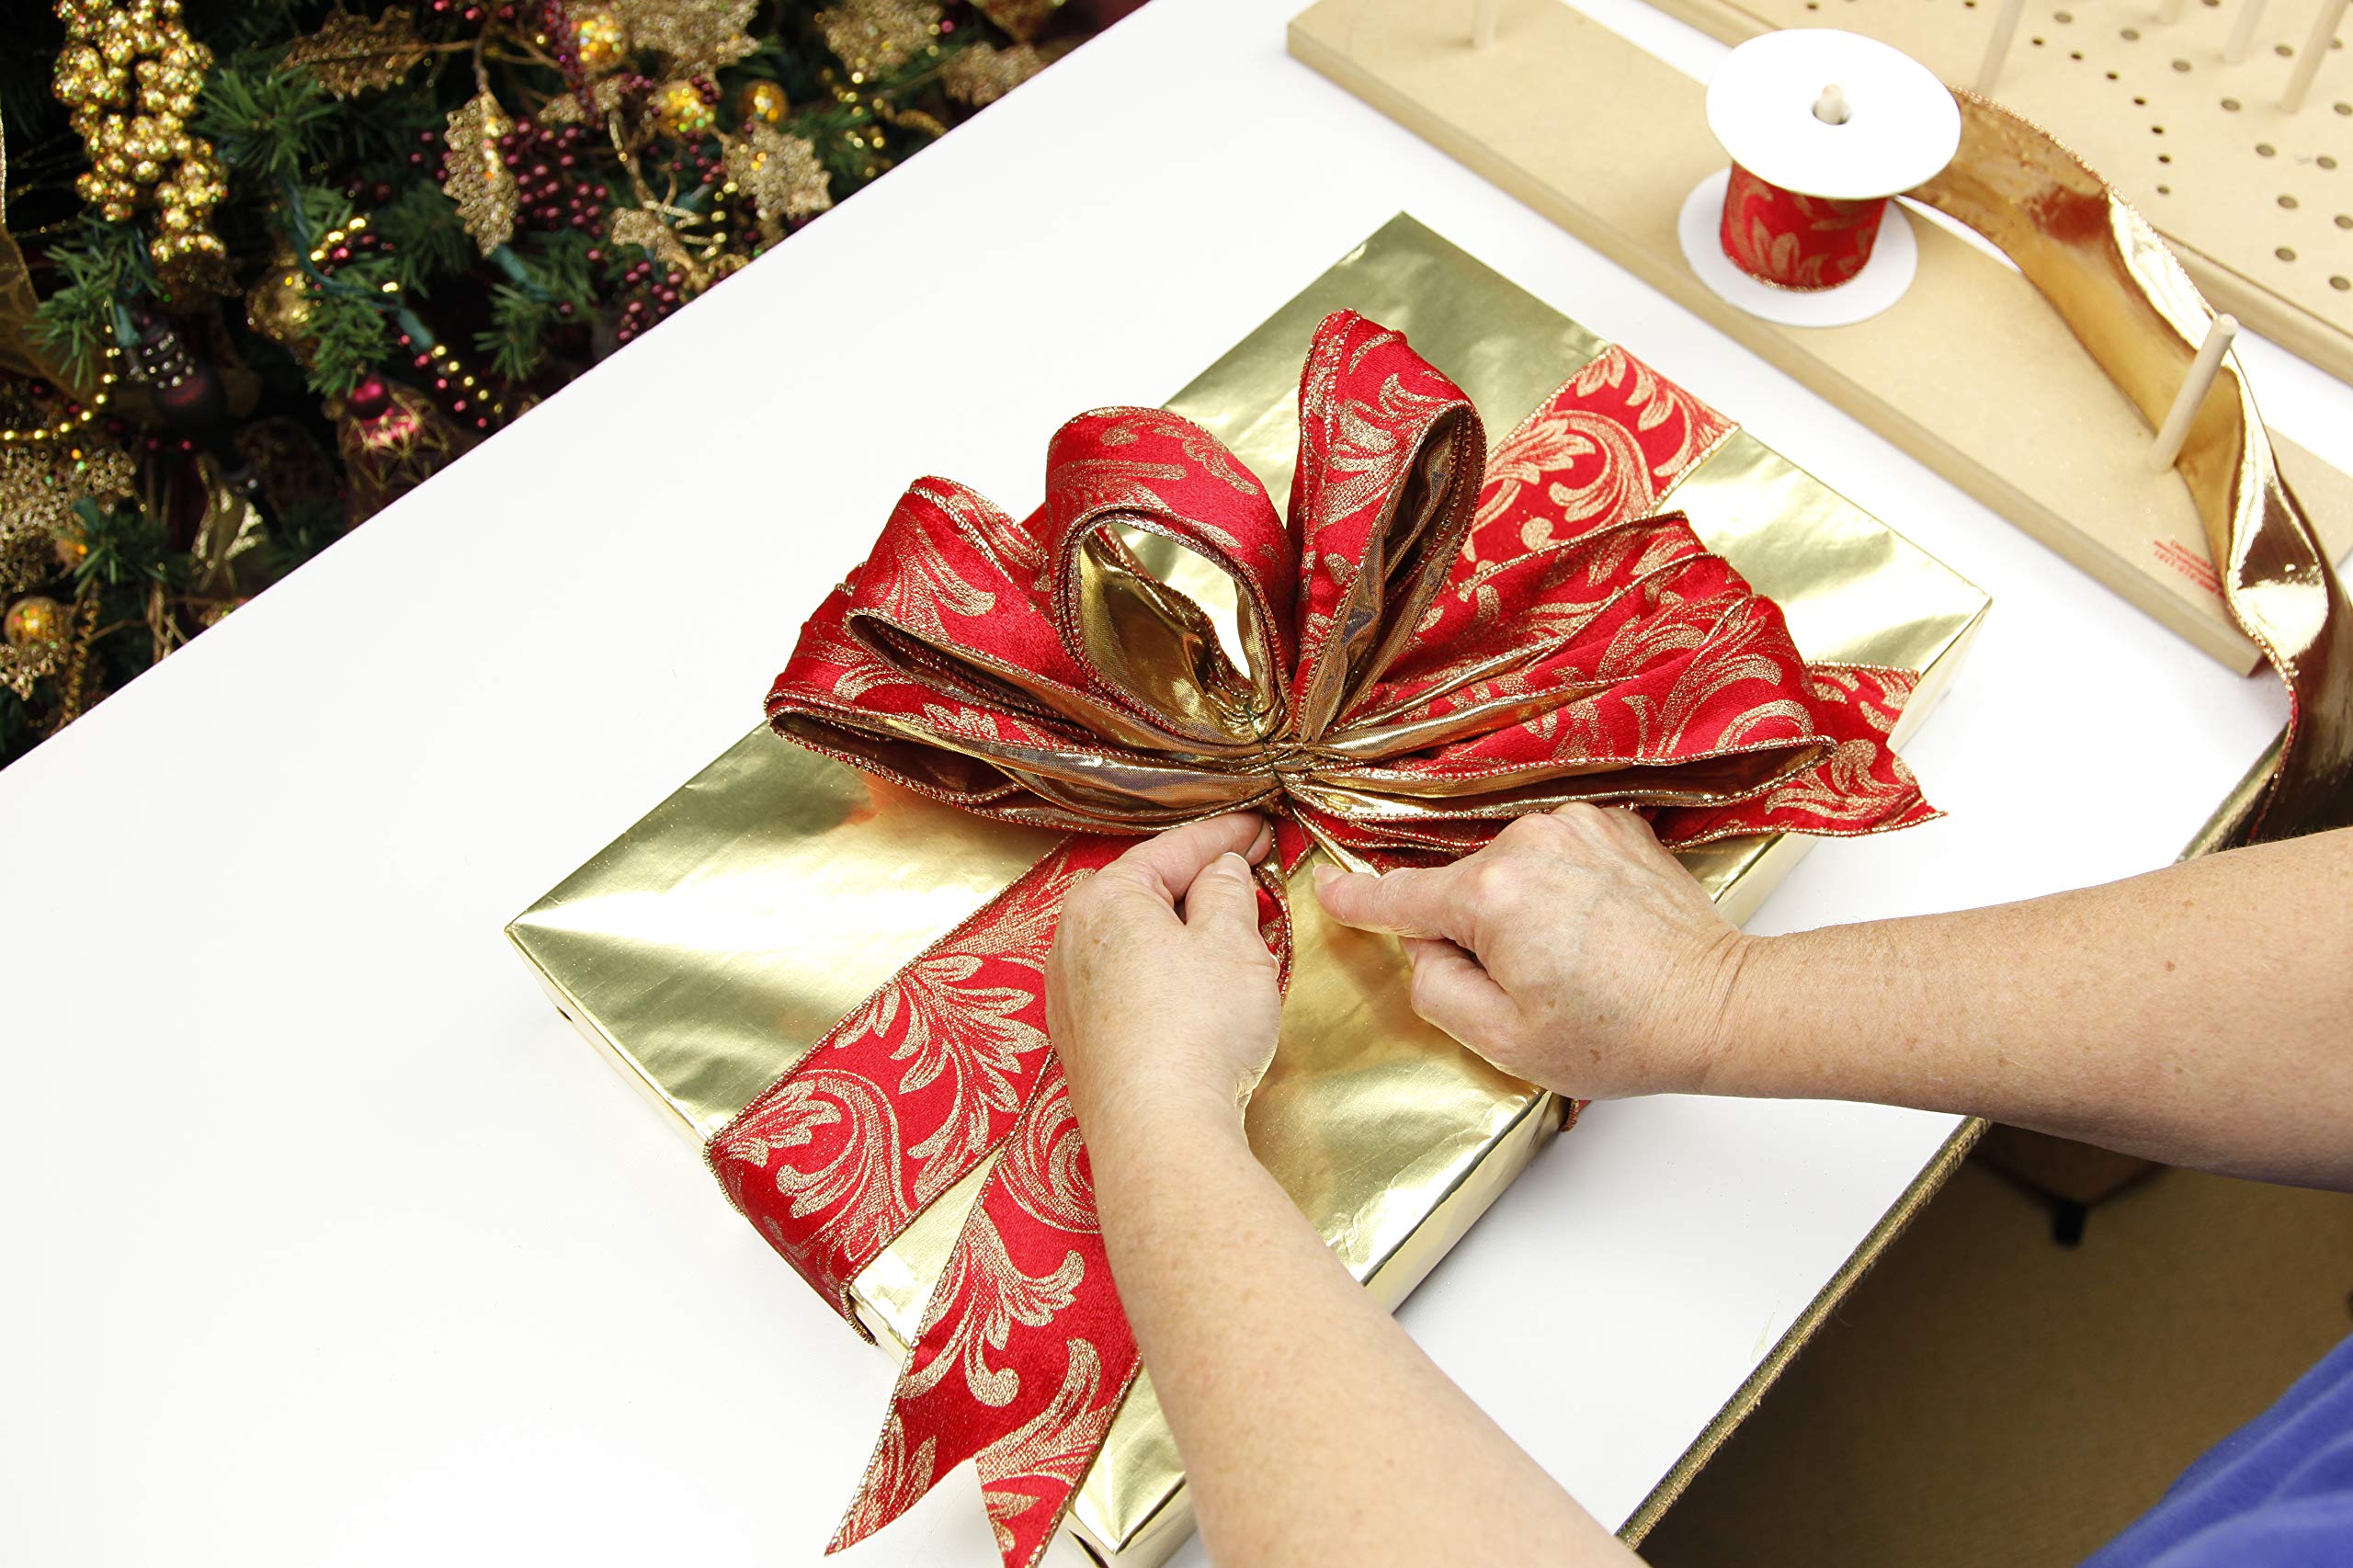 Pro Bow - The Hand Bow Maker (Large), Patented - Make Custom 3 Ribbon Bows for Holiday Wreaths and More